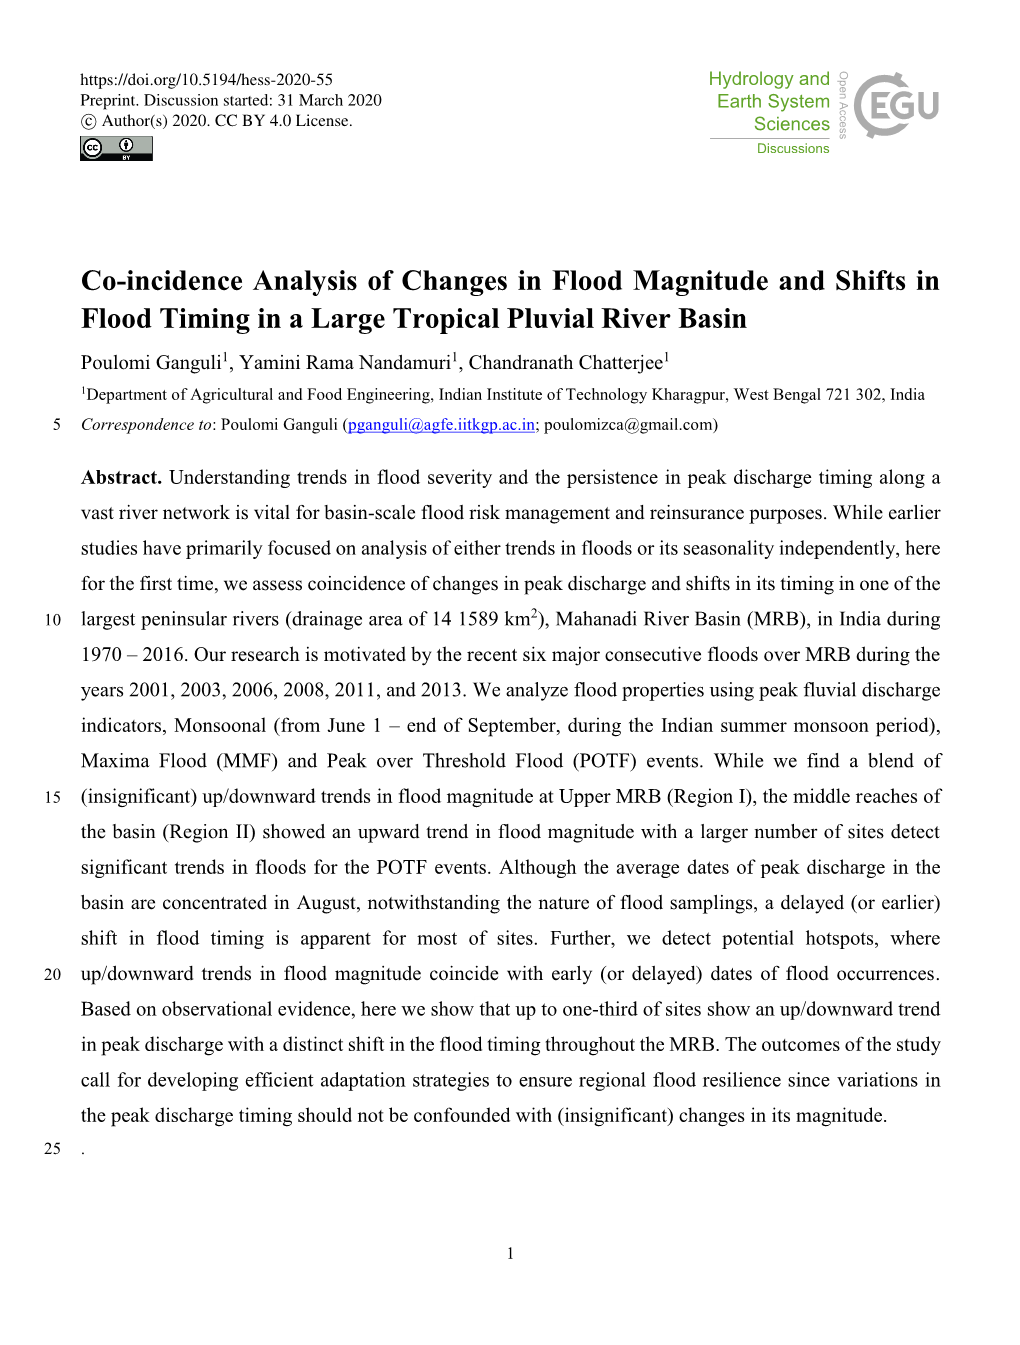 Co-Incidence Analysis of Changes in Flood Magnitude and Shifts